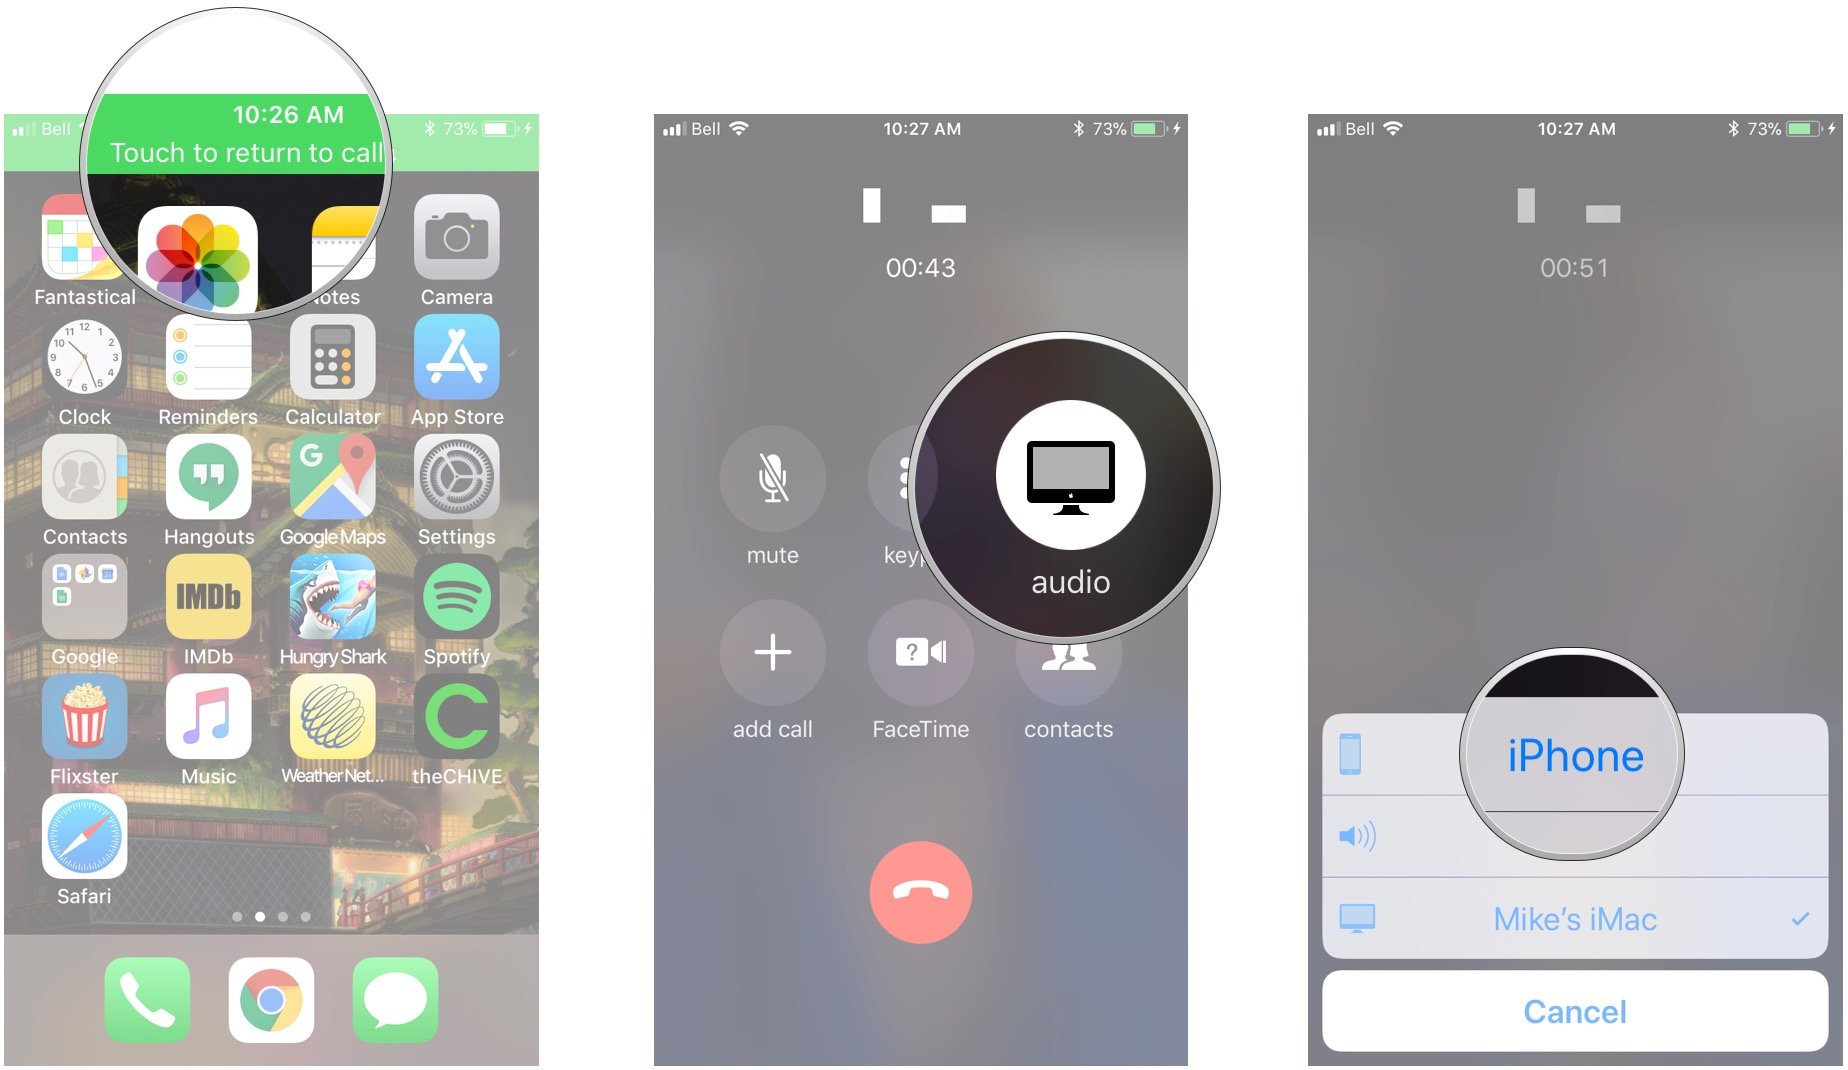 Tap the Touch to return to call banner, tap audio, tap iPhone